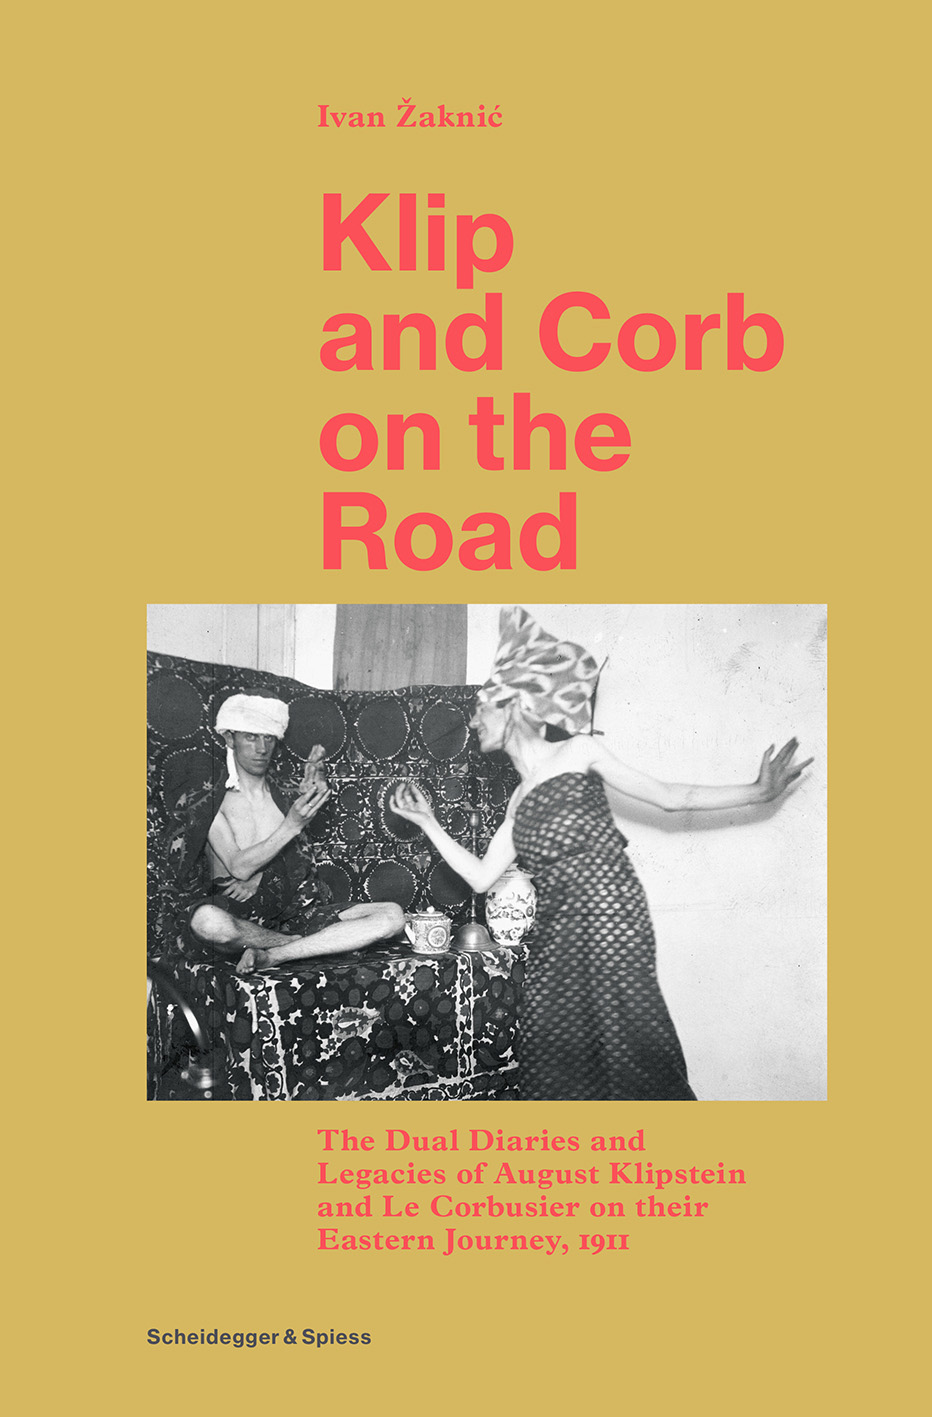 Download Klip and Corb on the Road: The Dual Diaries and Legacies of August Klipstein and Le Corbusier on their Eastern Journey, 1911 - Ivan Zaknic | PDF